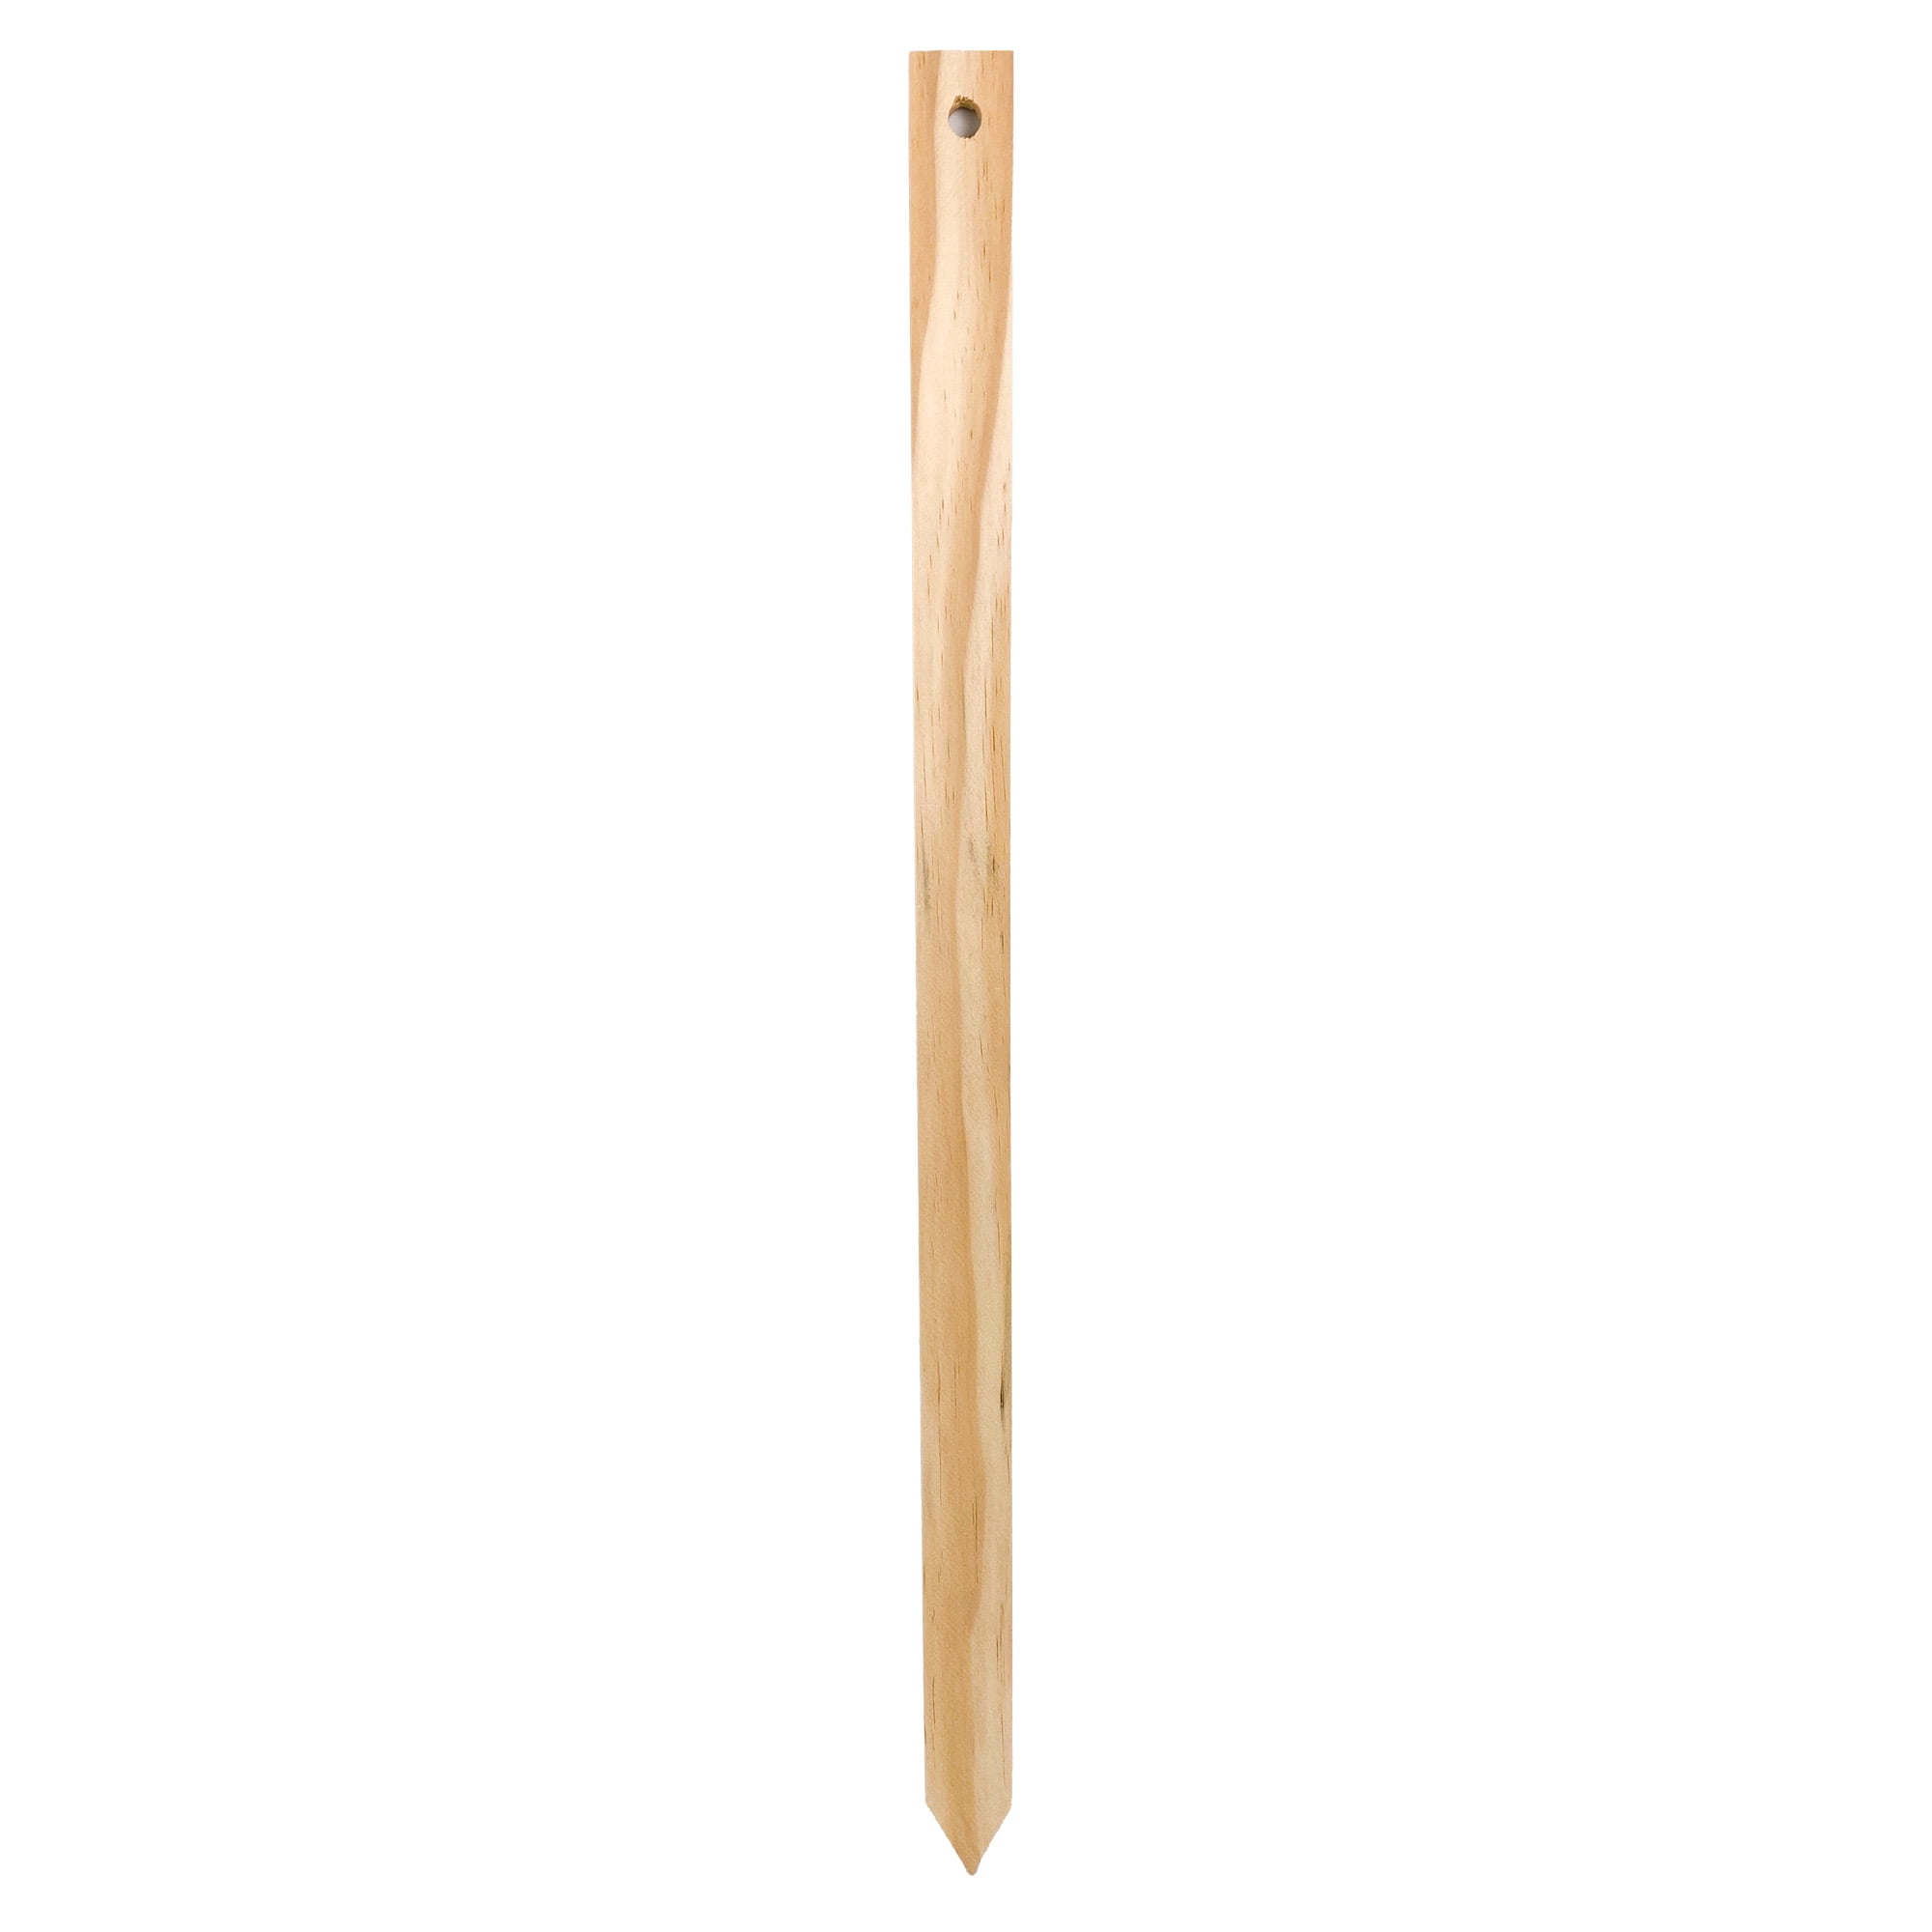 Hy-Ko Products 40603 Wooden Stake 21" High, Natural, 1 Piece